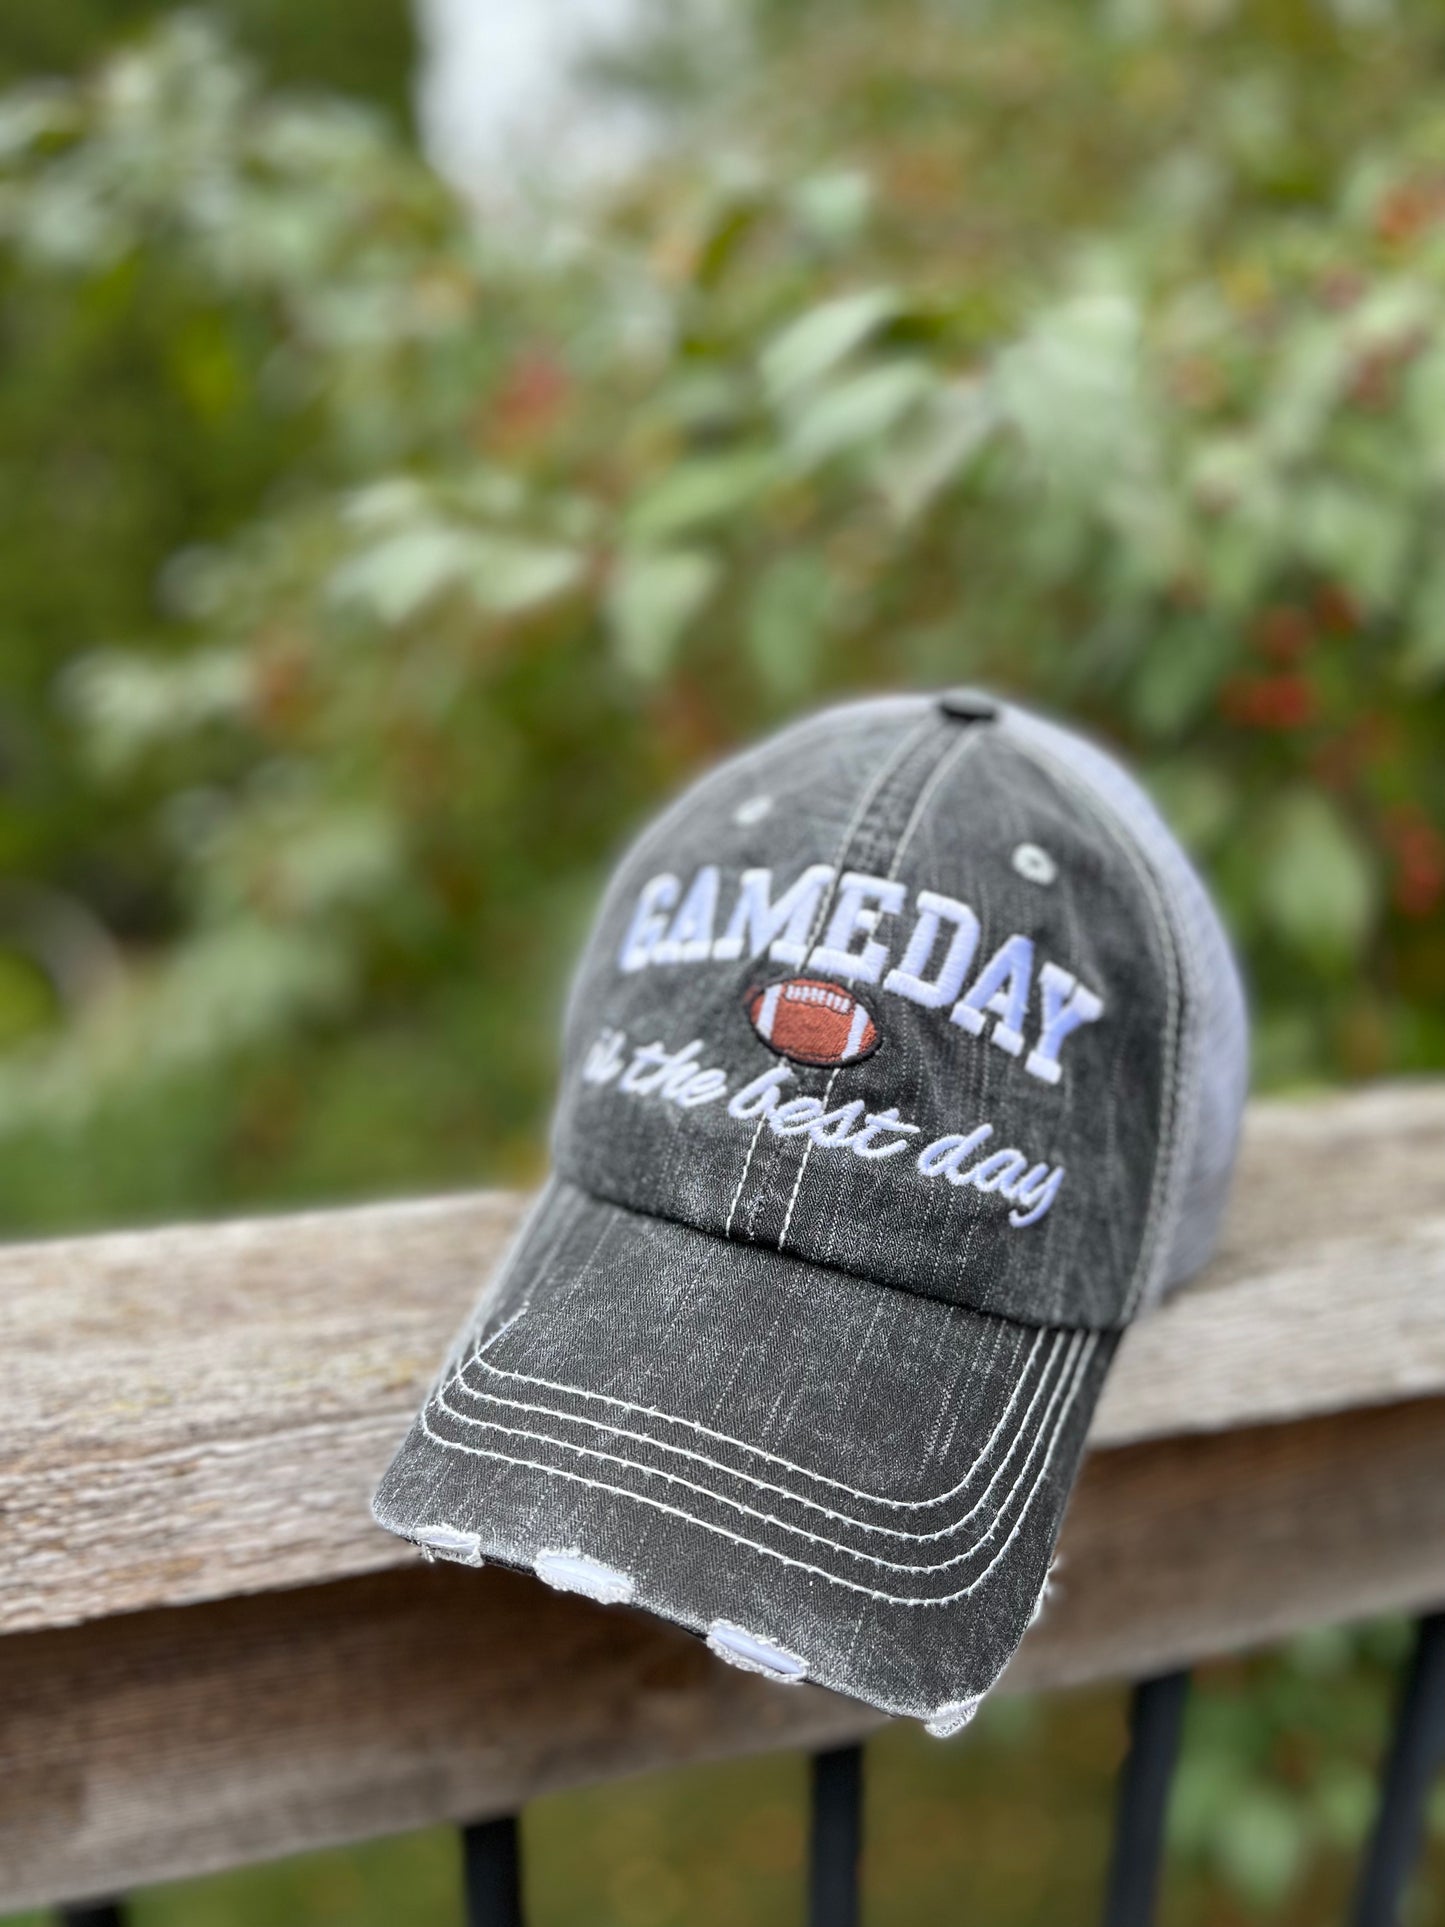 Gameday is the best day Football Gray embroidered distressed unisex trucker cap Sports